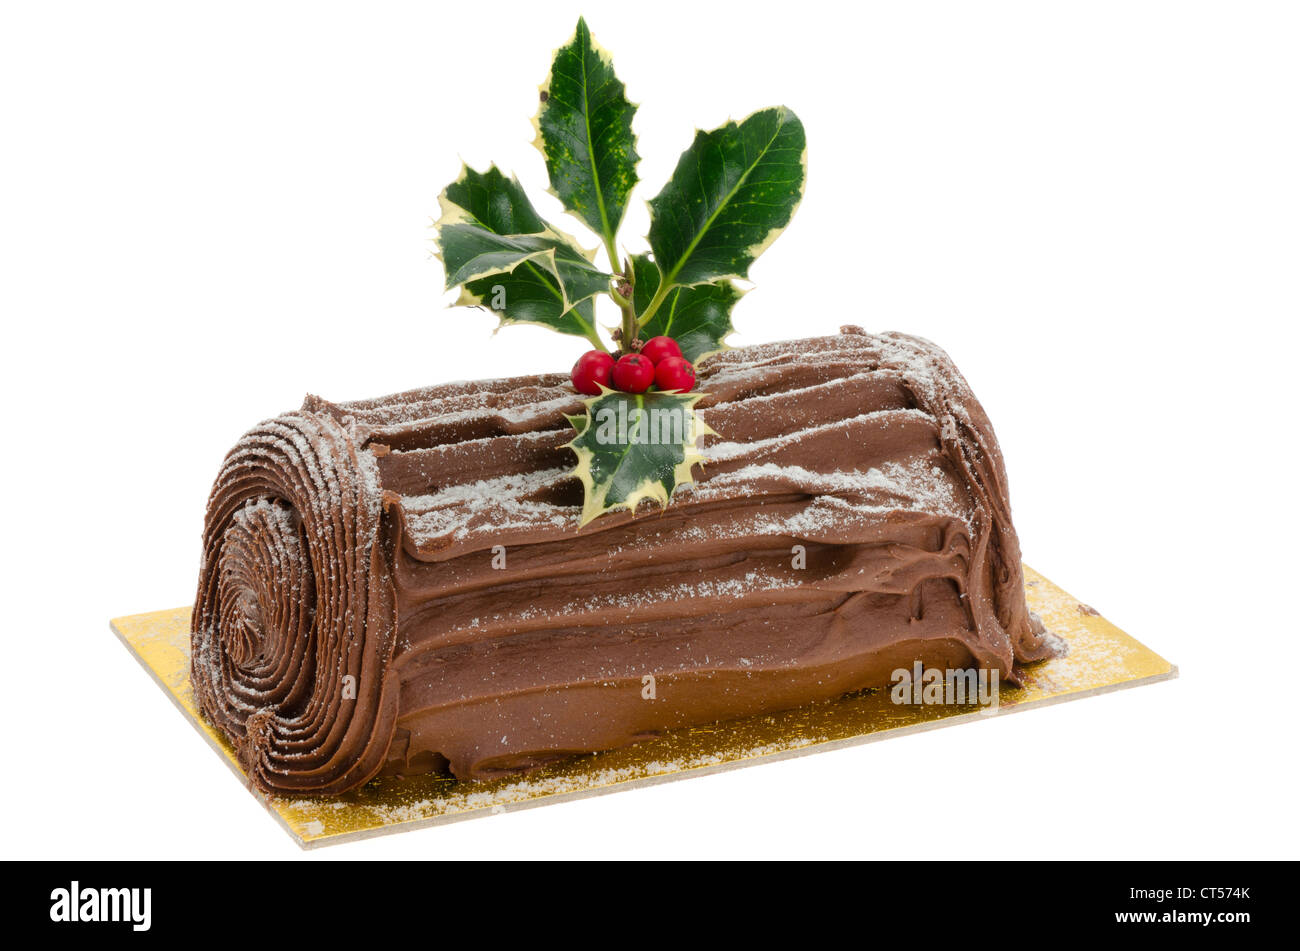 Chocolate Yule log - studio shot with a white background Stock Photo